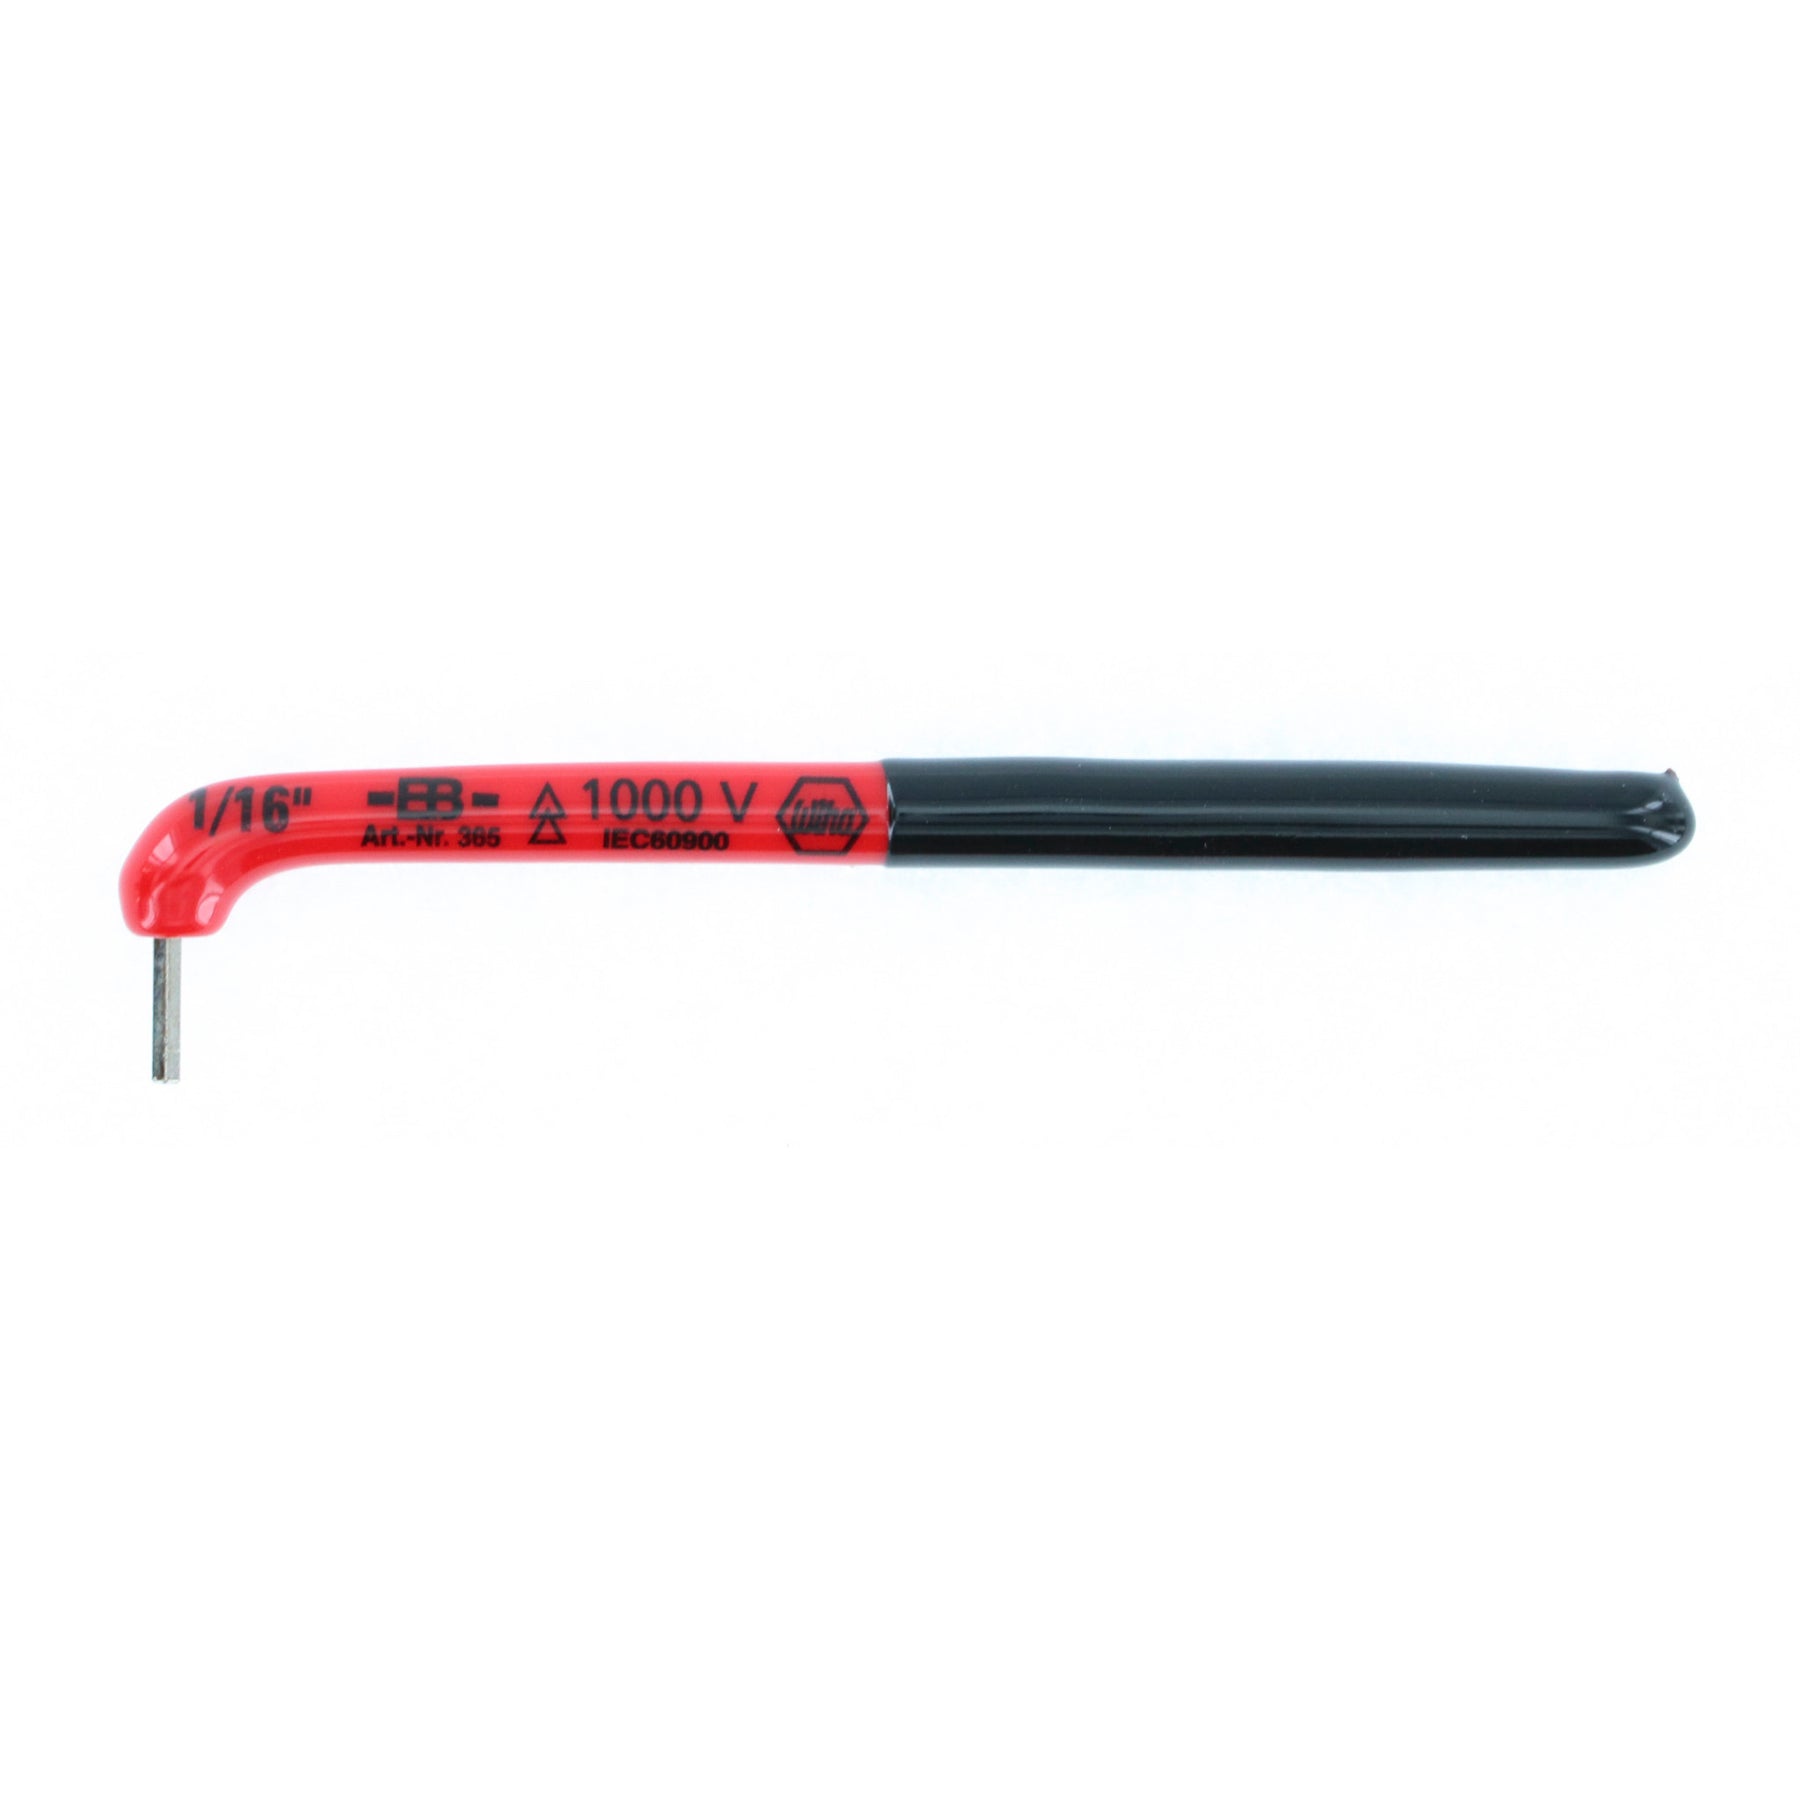 Insulated Hex Key 1/16" x 3.1"